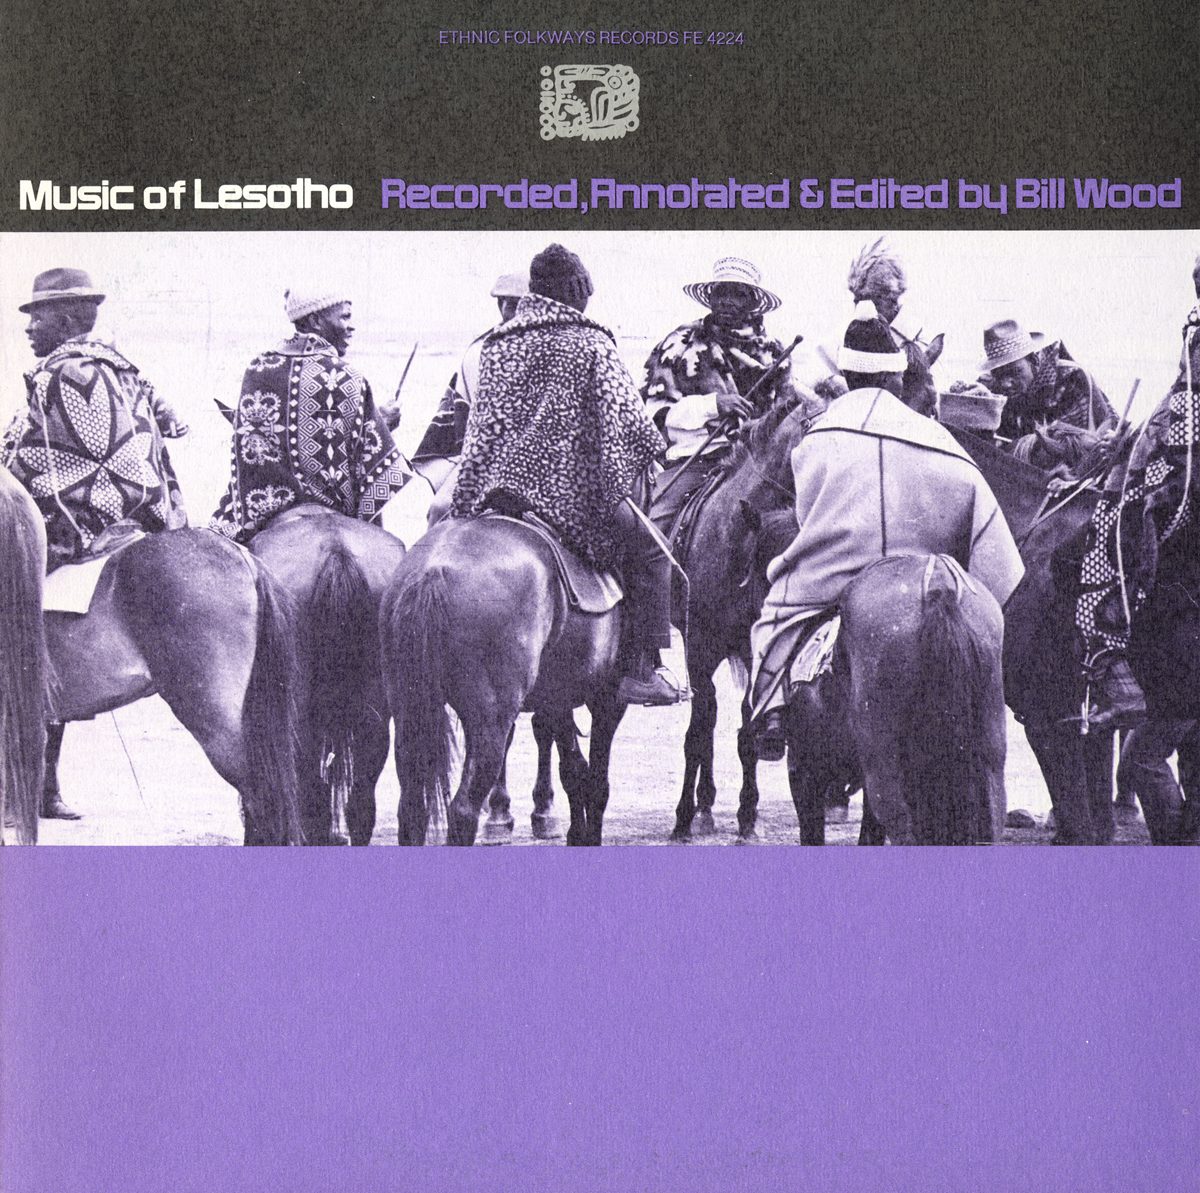 MUSIC OF LESOTHO / VARIOUS